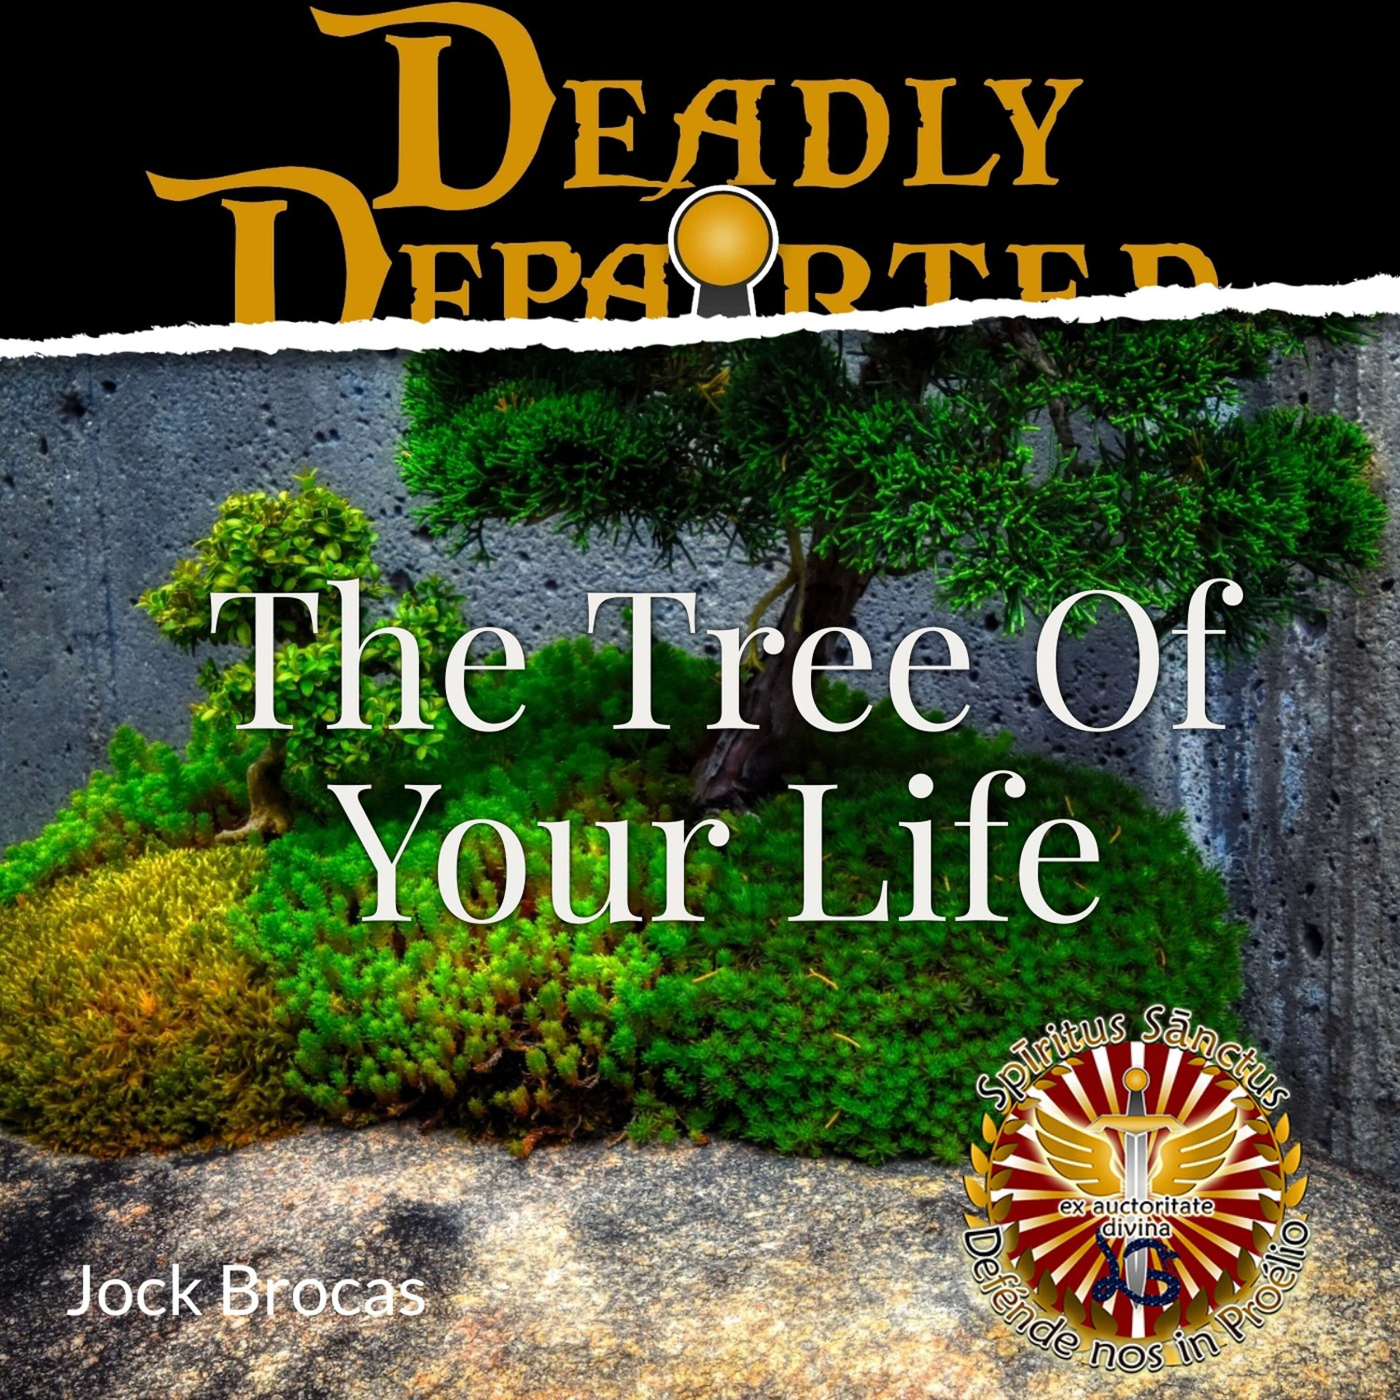 The Tree of Your Life